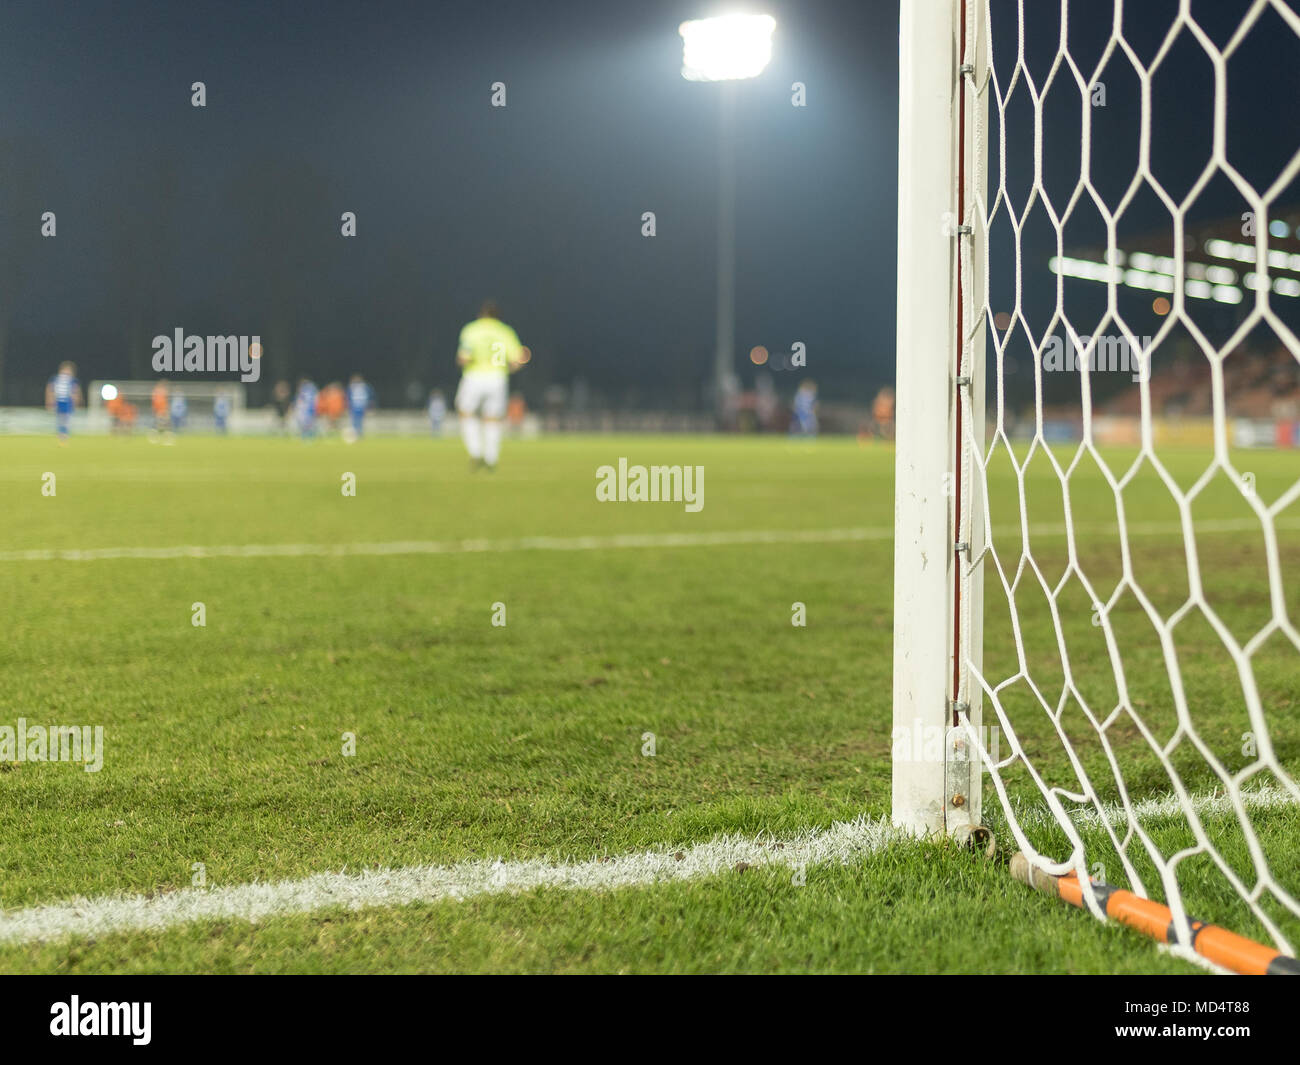 Detail Of The Post And Net Of The Football Goal In The Background Players In Action Stock Photo Alamy